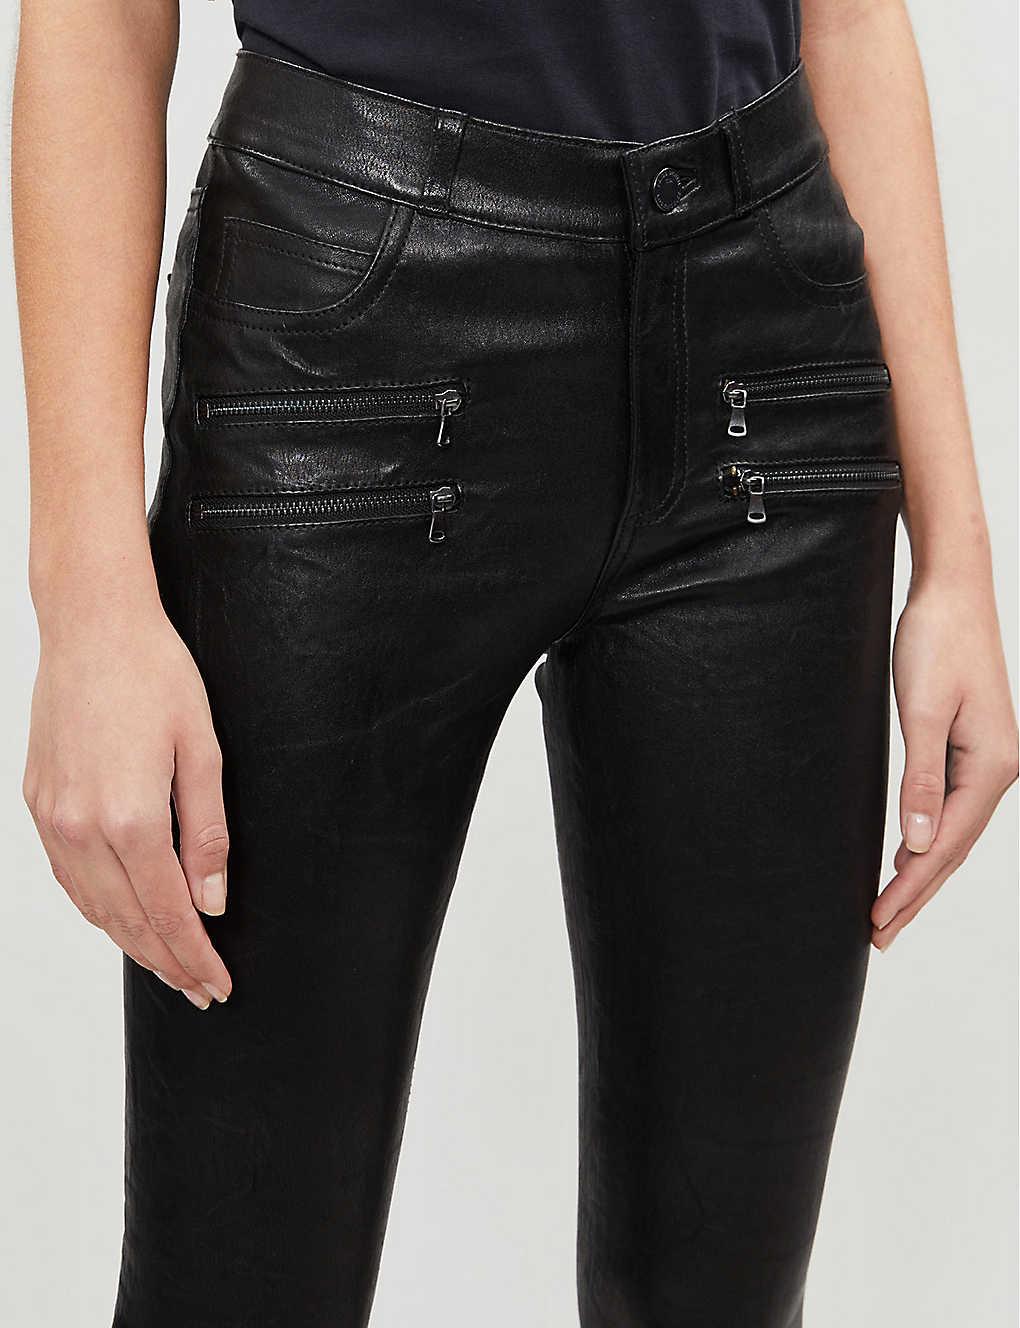 PAIGE Edgemont Skinny Mid-rise Leather Jeans in Black - Lyst